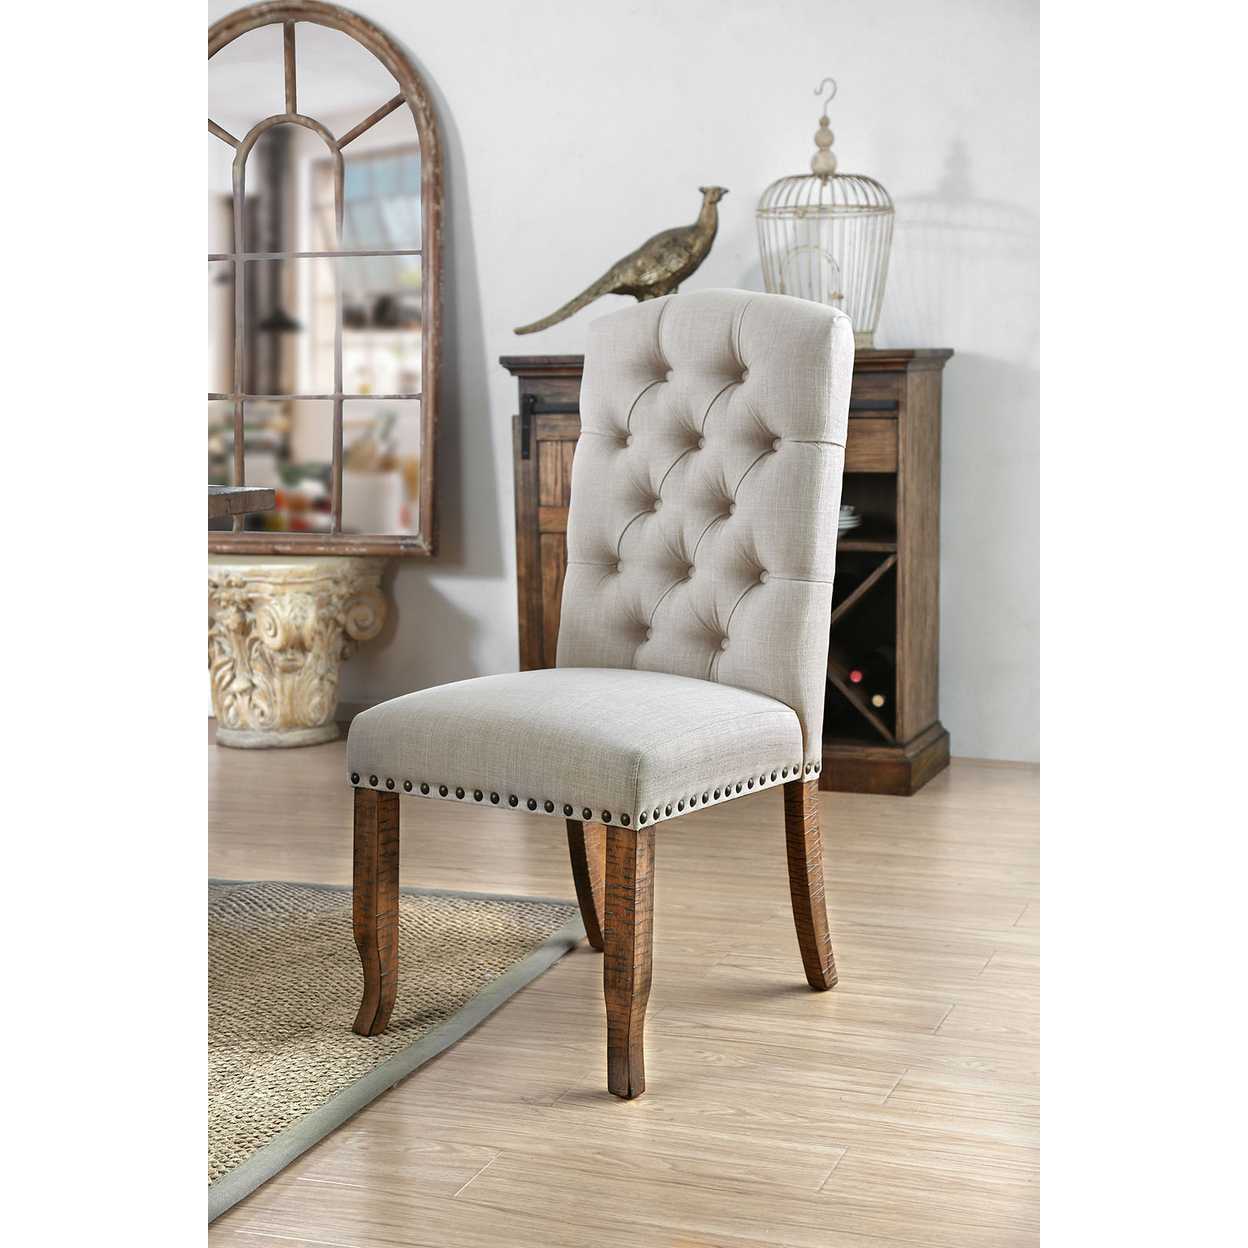 Button Tufted Fabric Upholstery Side Chair, Cream And Brown, Pack Of Two- Saltoro Sherpi